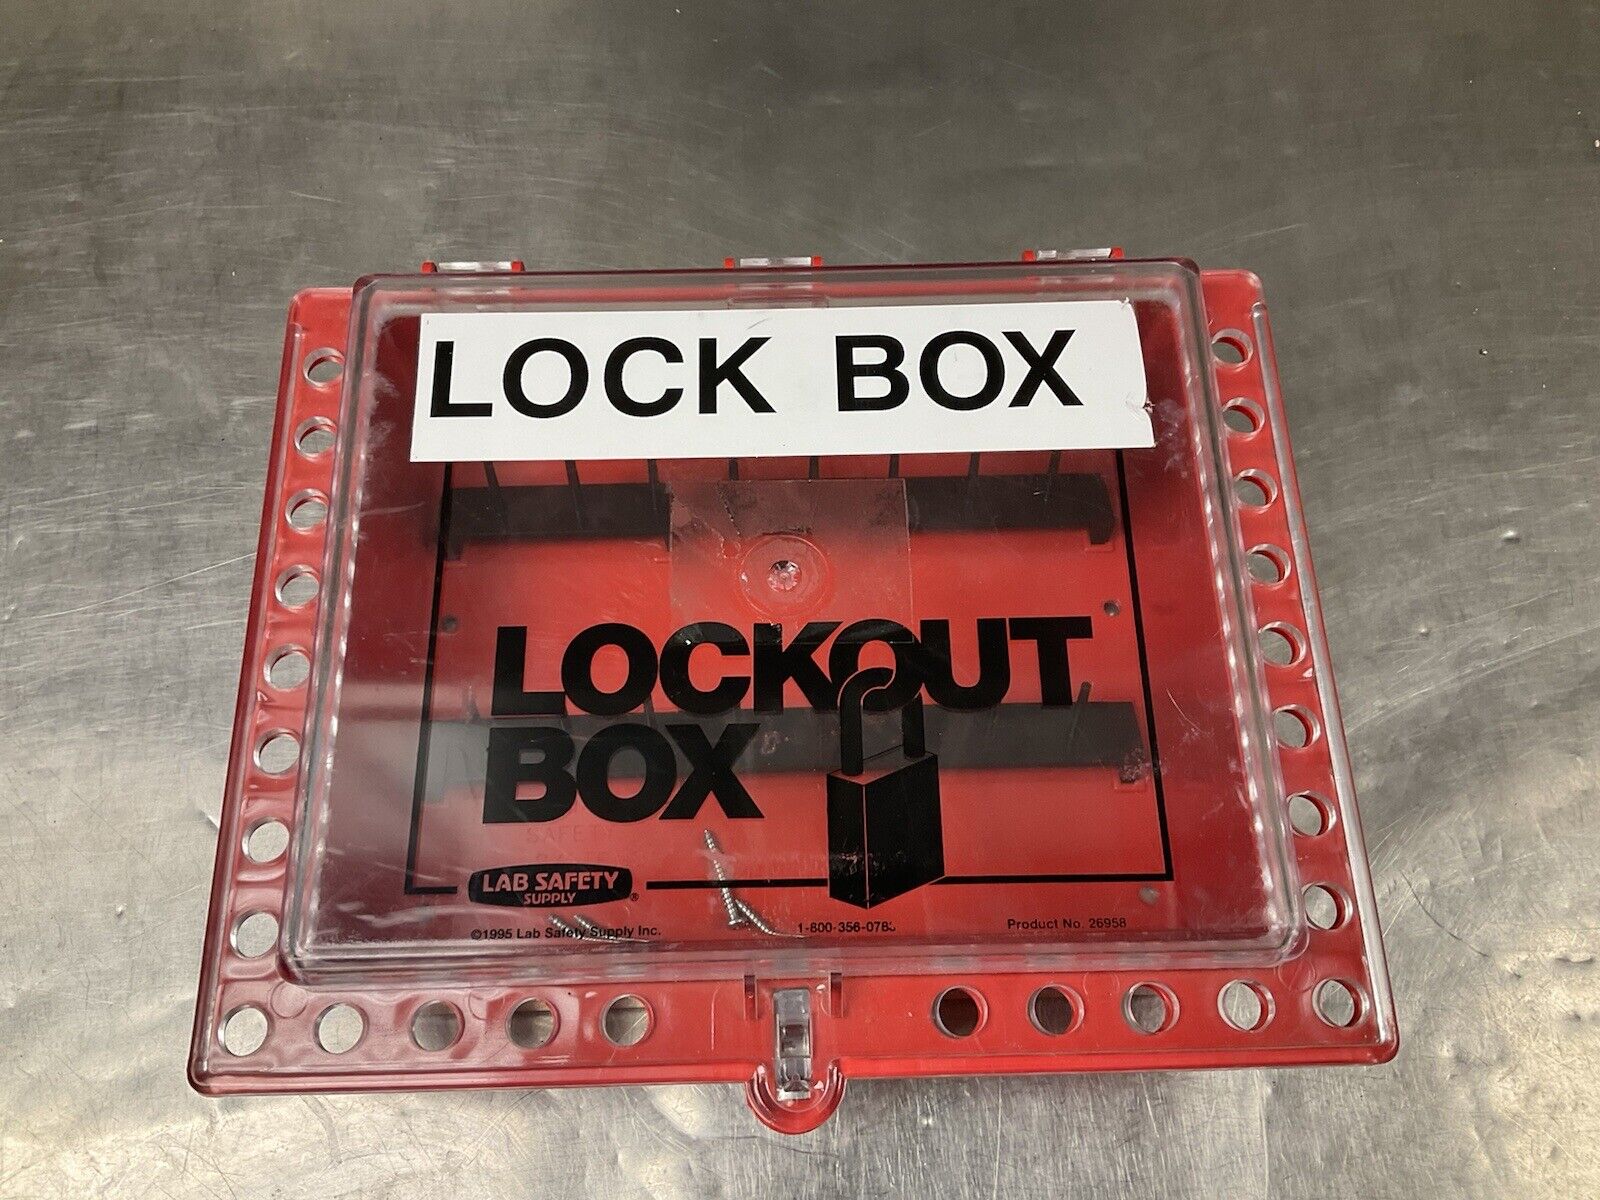 Lab Safety Supply, Lockout Box Product# 26958